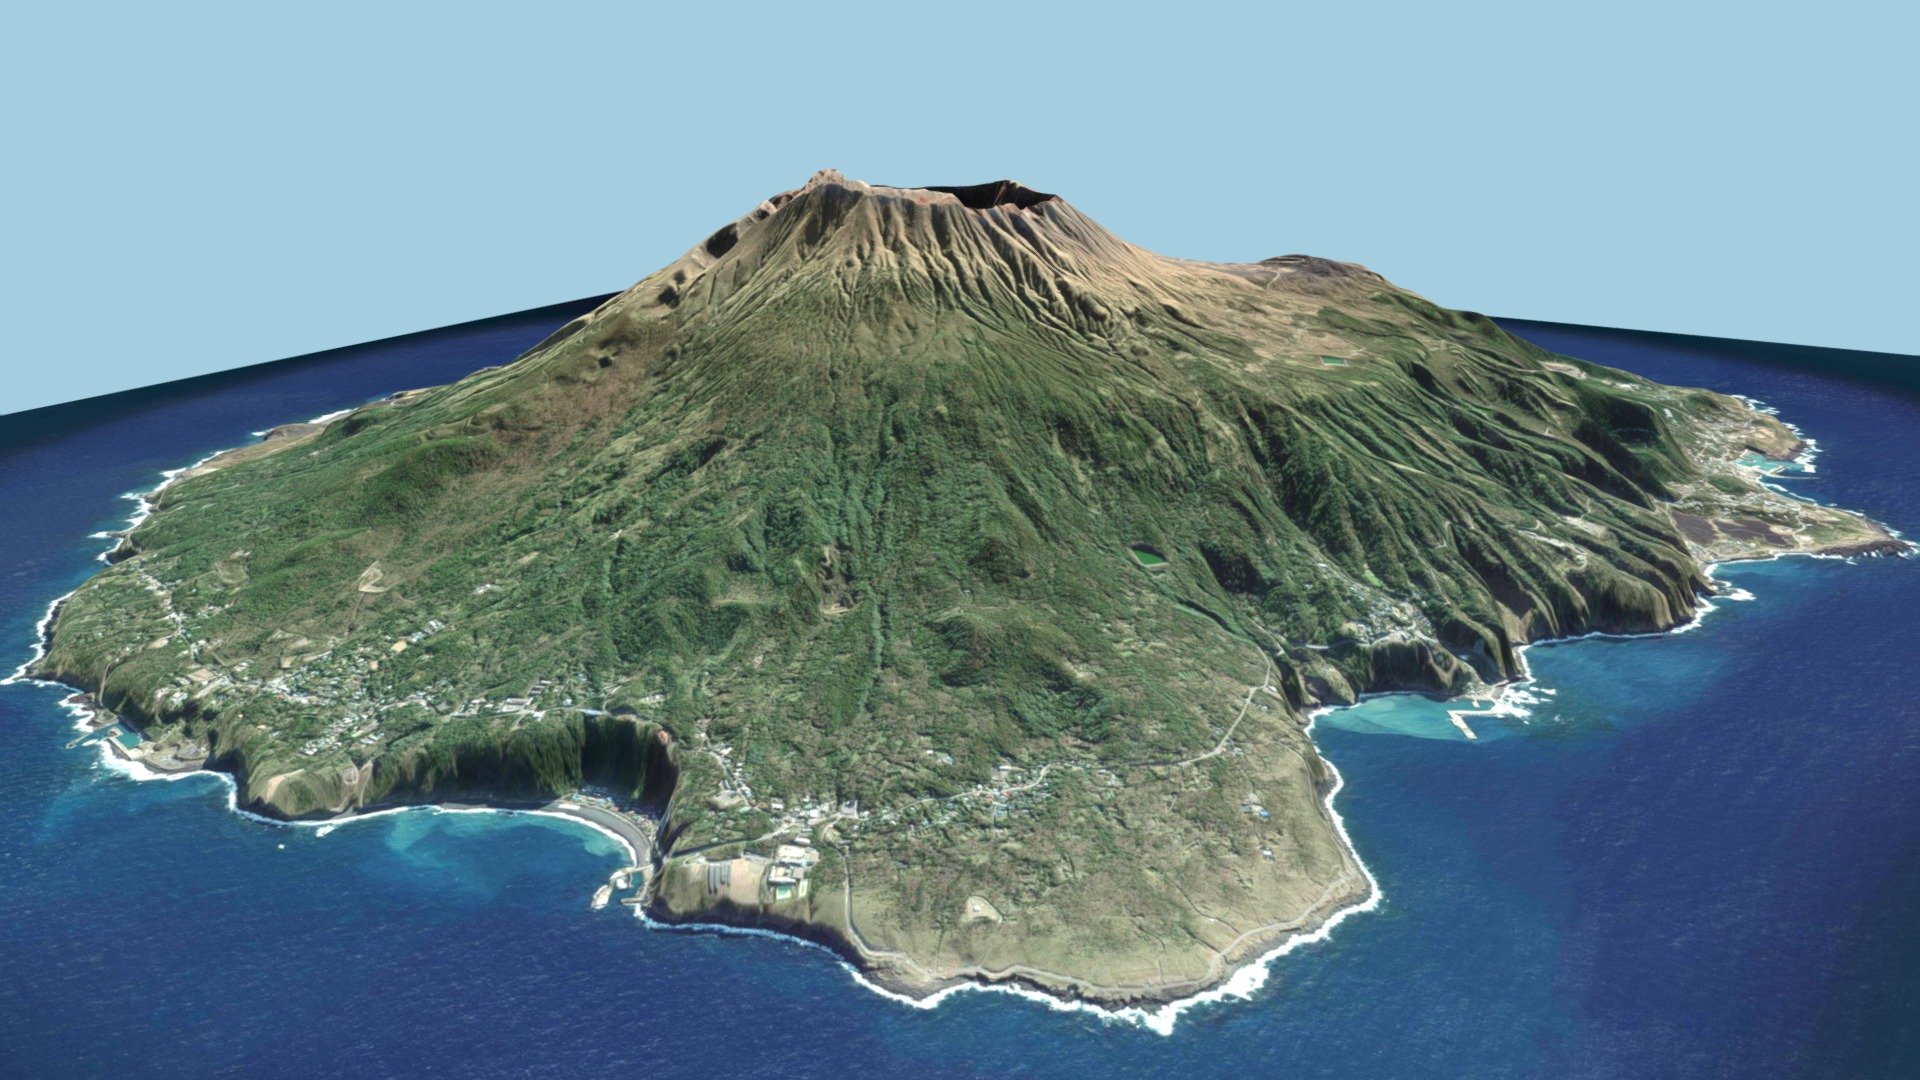 Miyake island volcano off the coast of Japan. Model includes a high resolution texture. The native file was made with Blender 2.90, rendered in Eevee with the mist adjusted in the composer. Export files are available in FBX, OBJ, and GLB formats 3d model